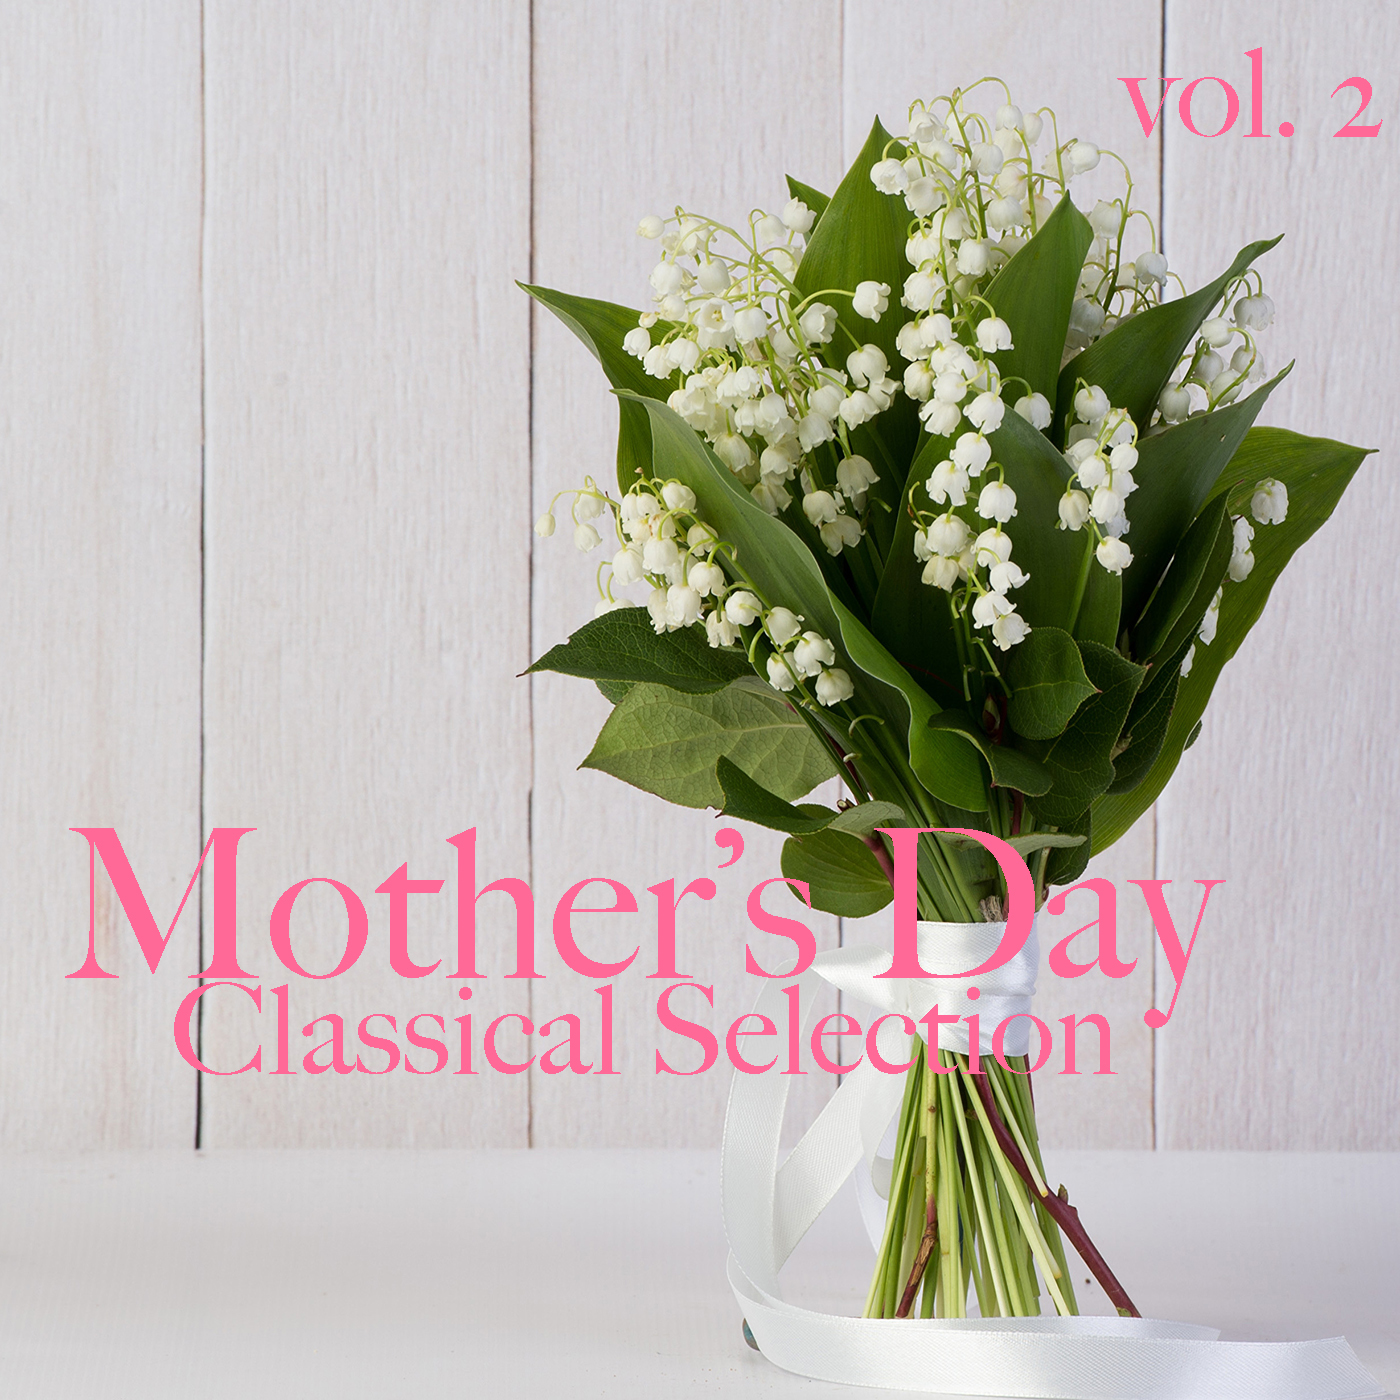 Mother's Day Classical Selection vol. 2